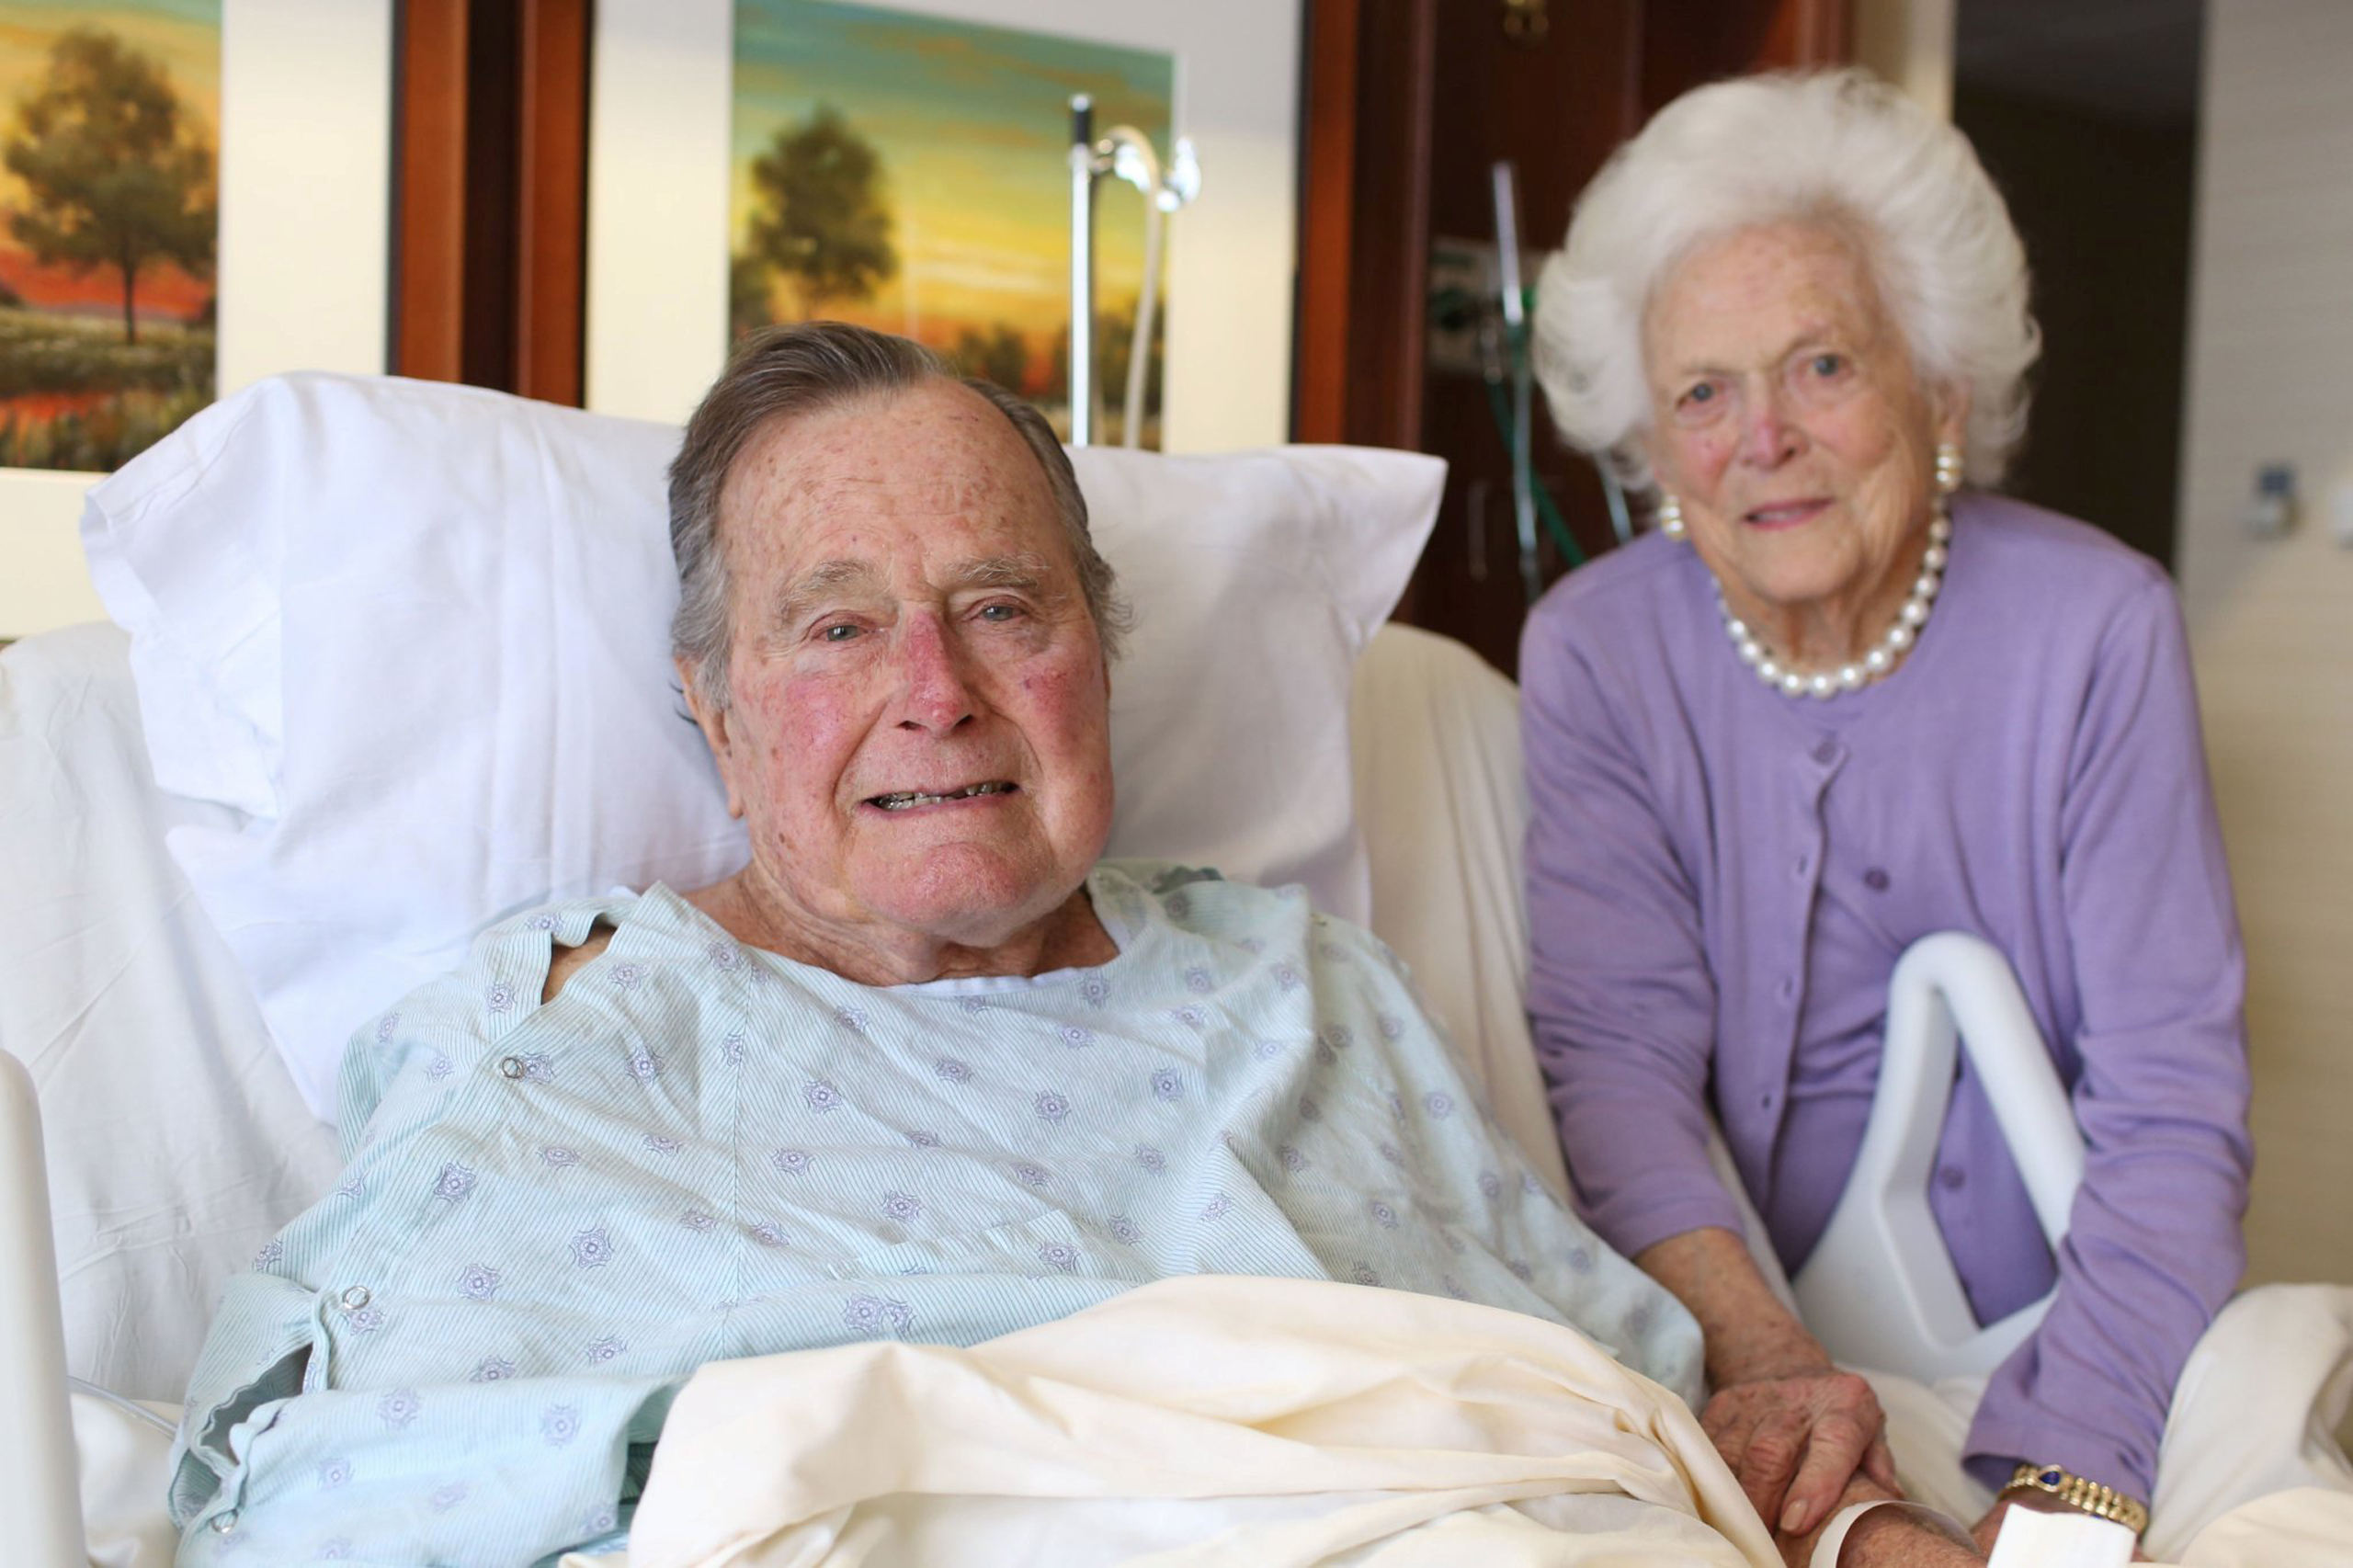 Former President George H.W. Bush and his wife Barbara Bush are pictured in Houston Methodist Hospital in Houston in this handout photo